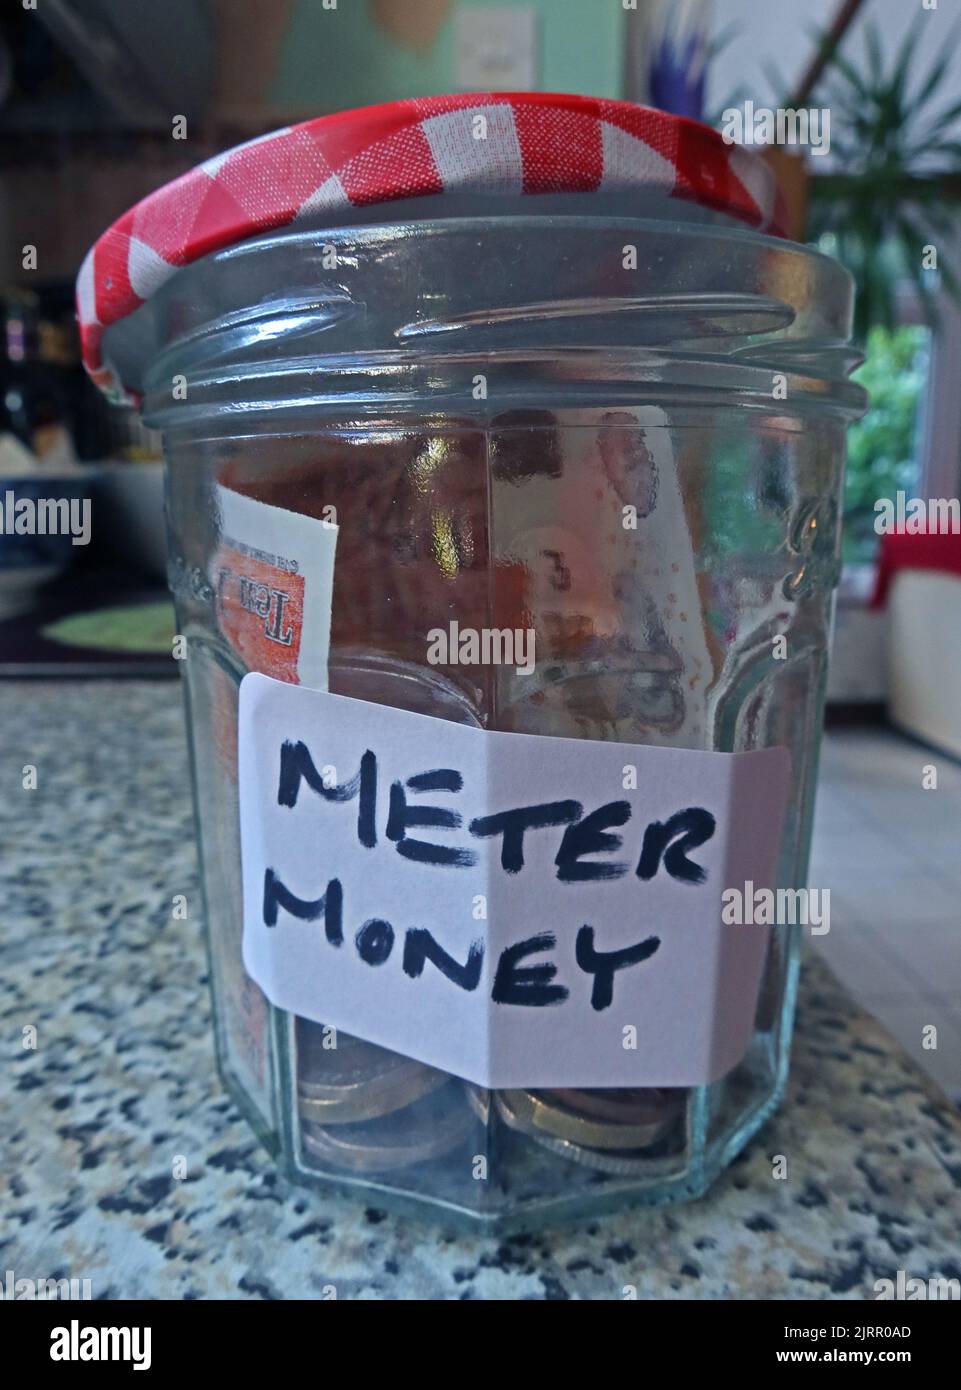 A jar for heating money, to be used to top up a card fuel meter Stock Photo